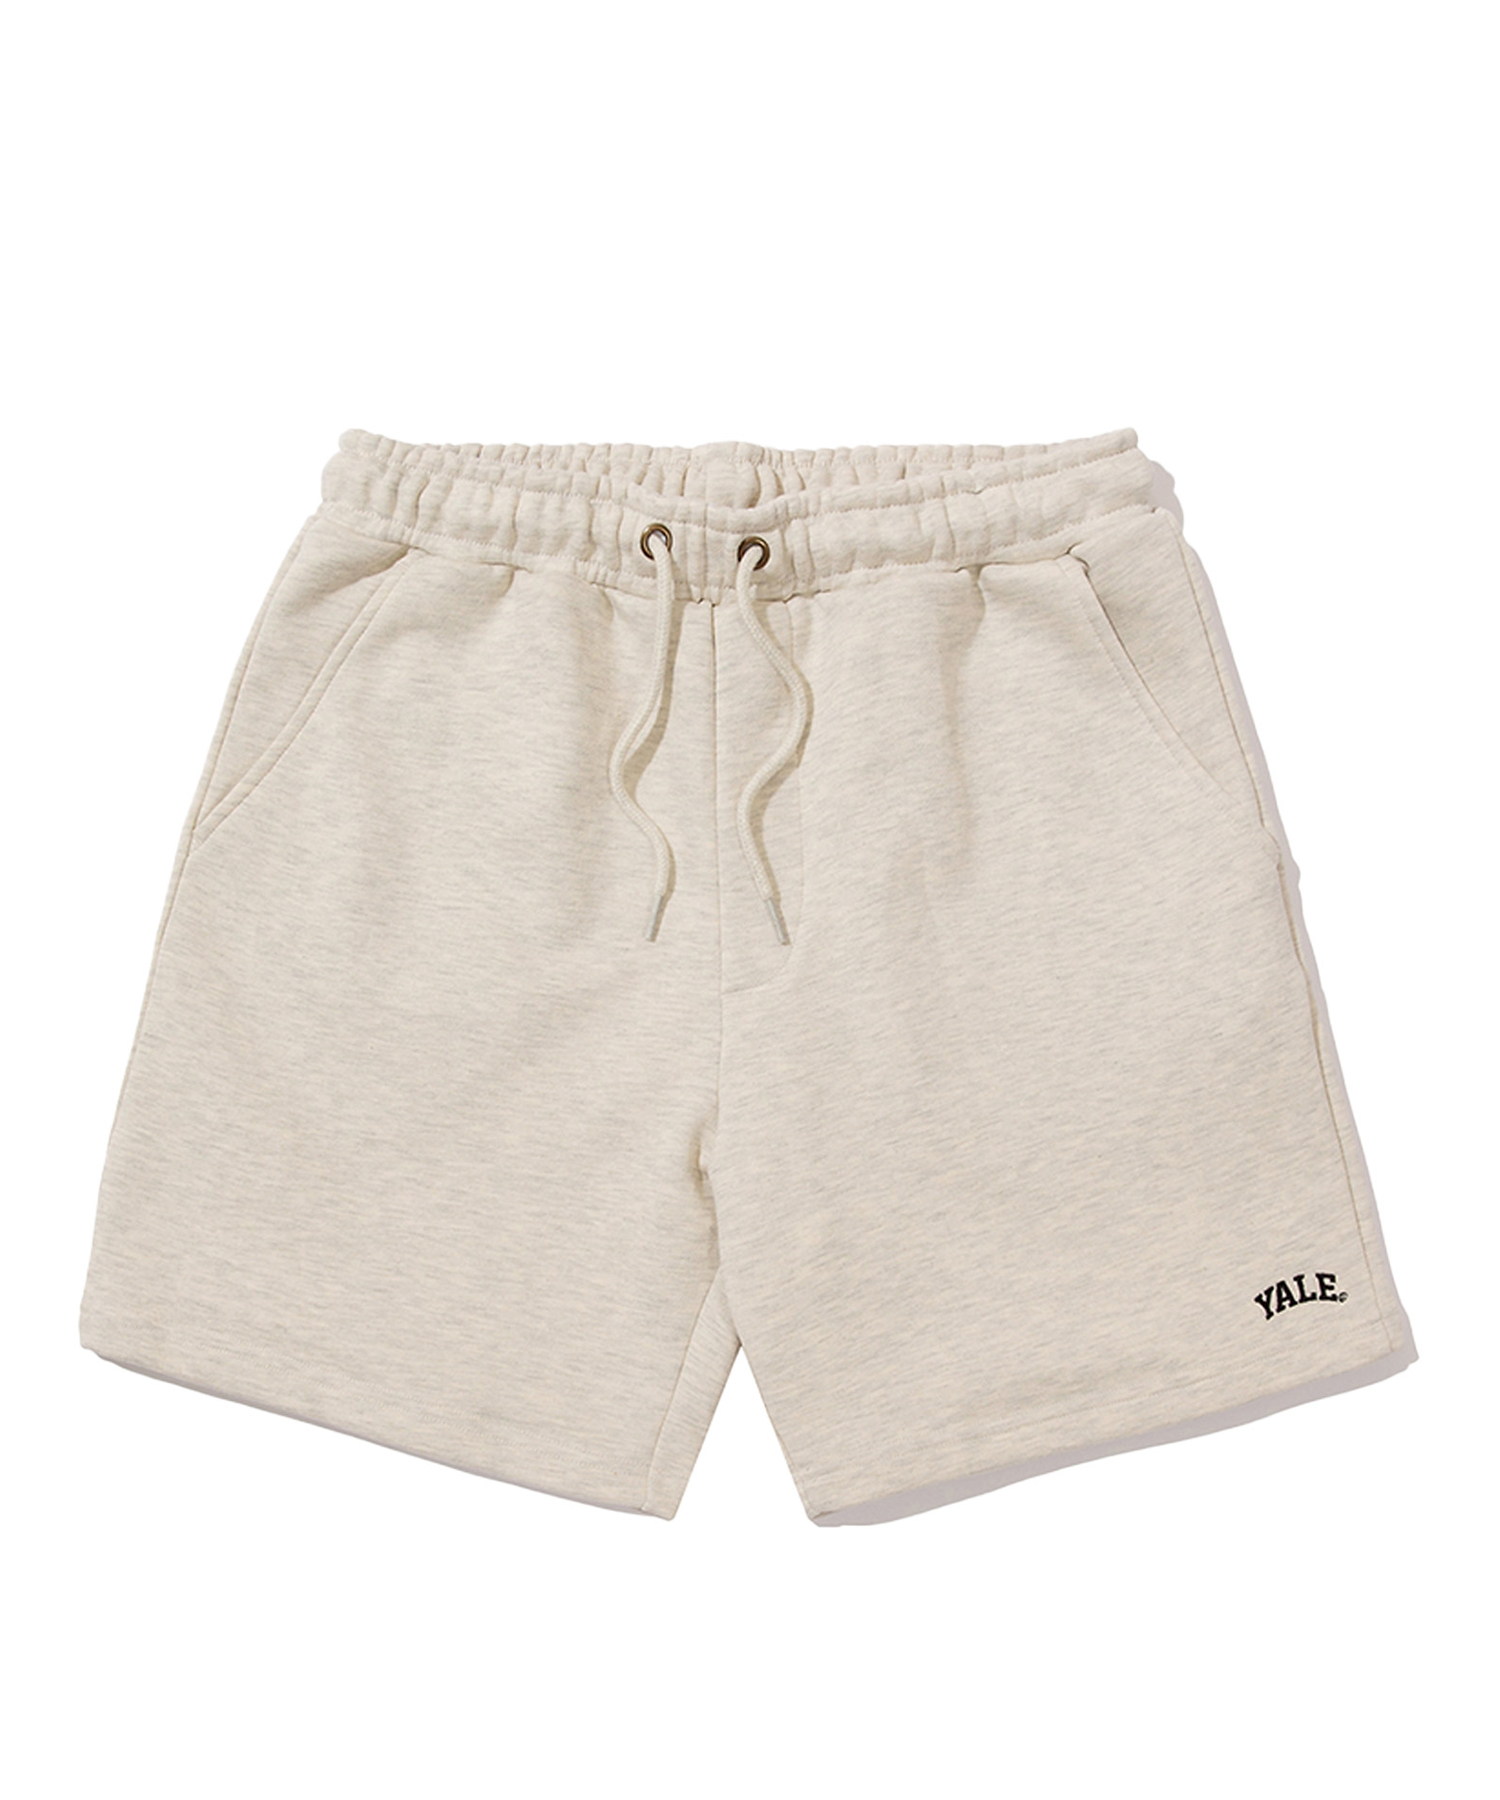 [ONEMILE WEAR] SMALL ARCH SWEAT SHORTS OATMEAL